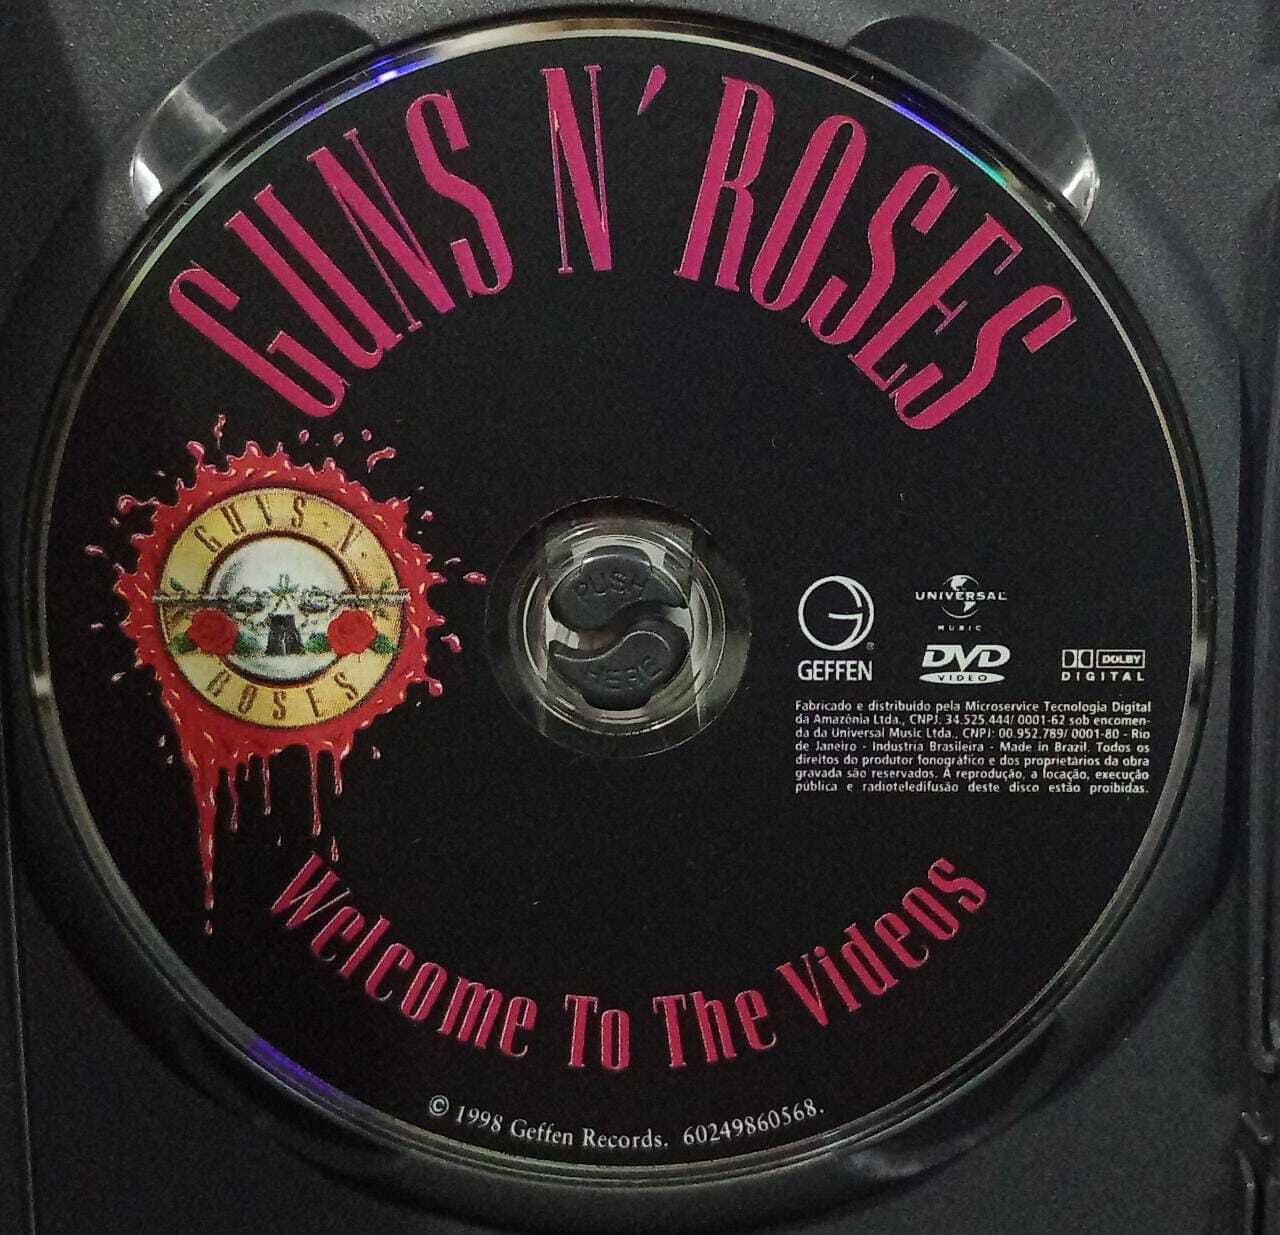 DVD - Guns and Roses - Welcome to the Videos